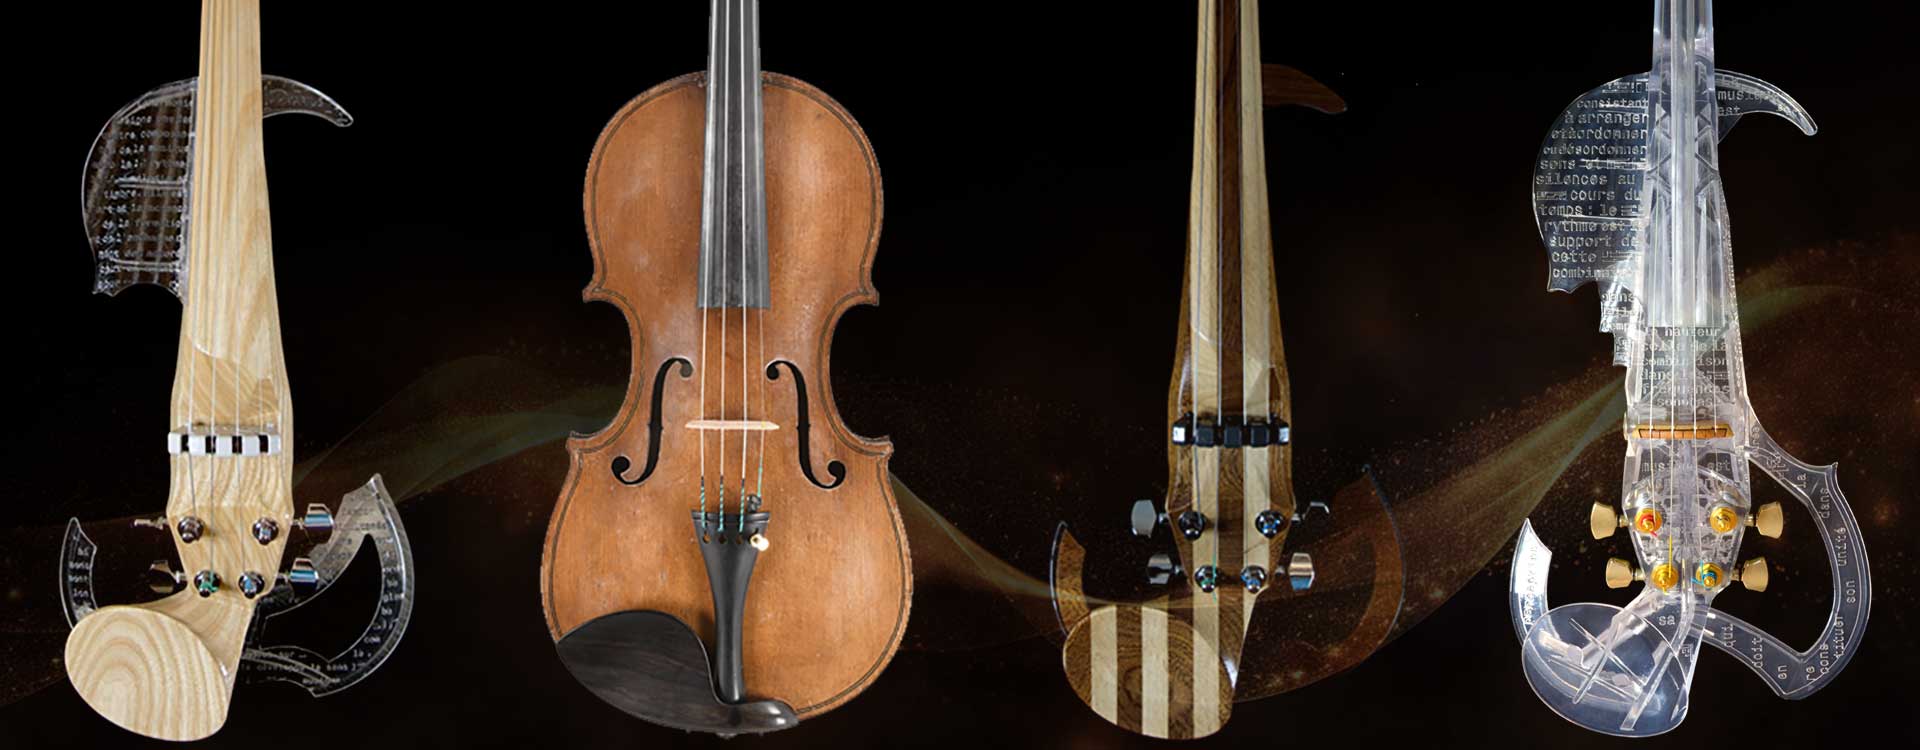 Comparison between an acoustic and electric violin